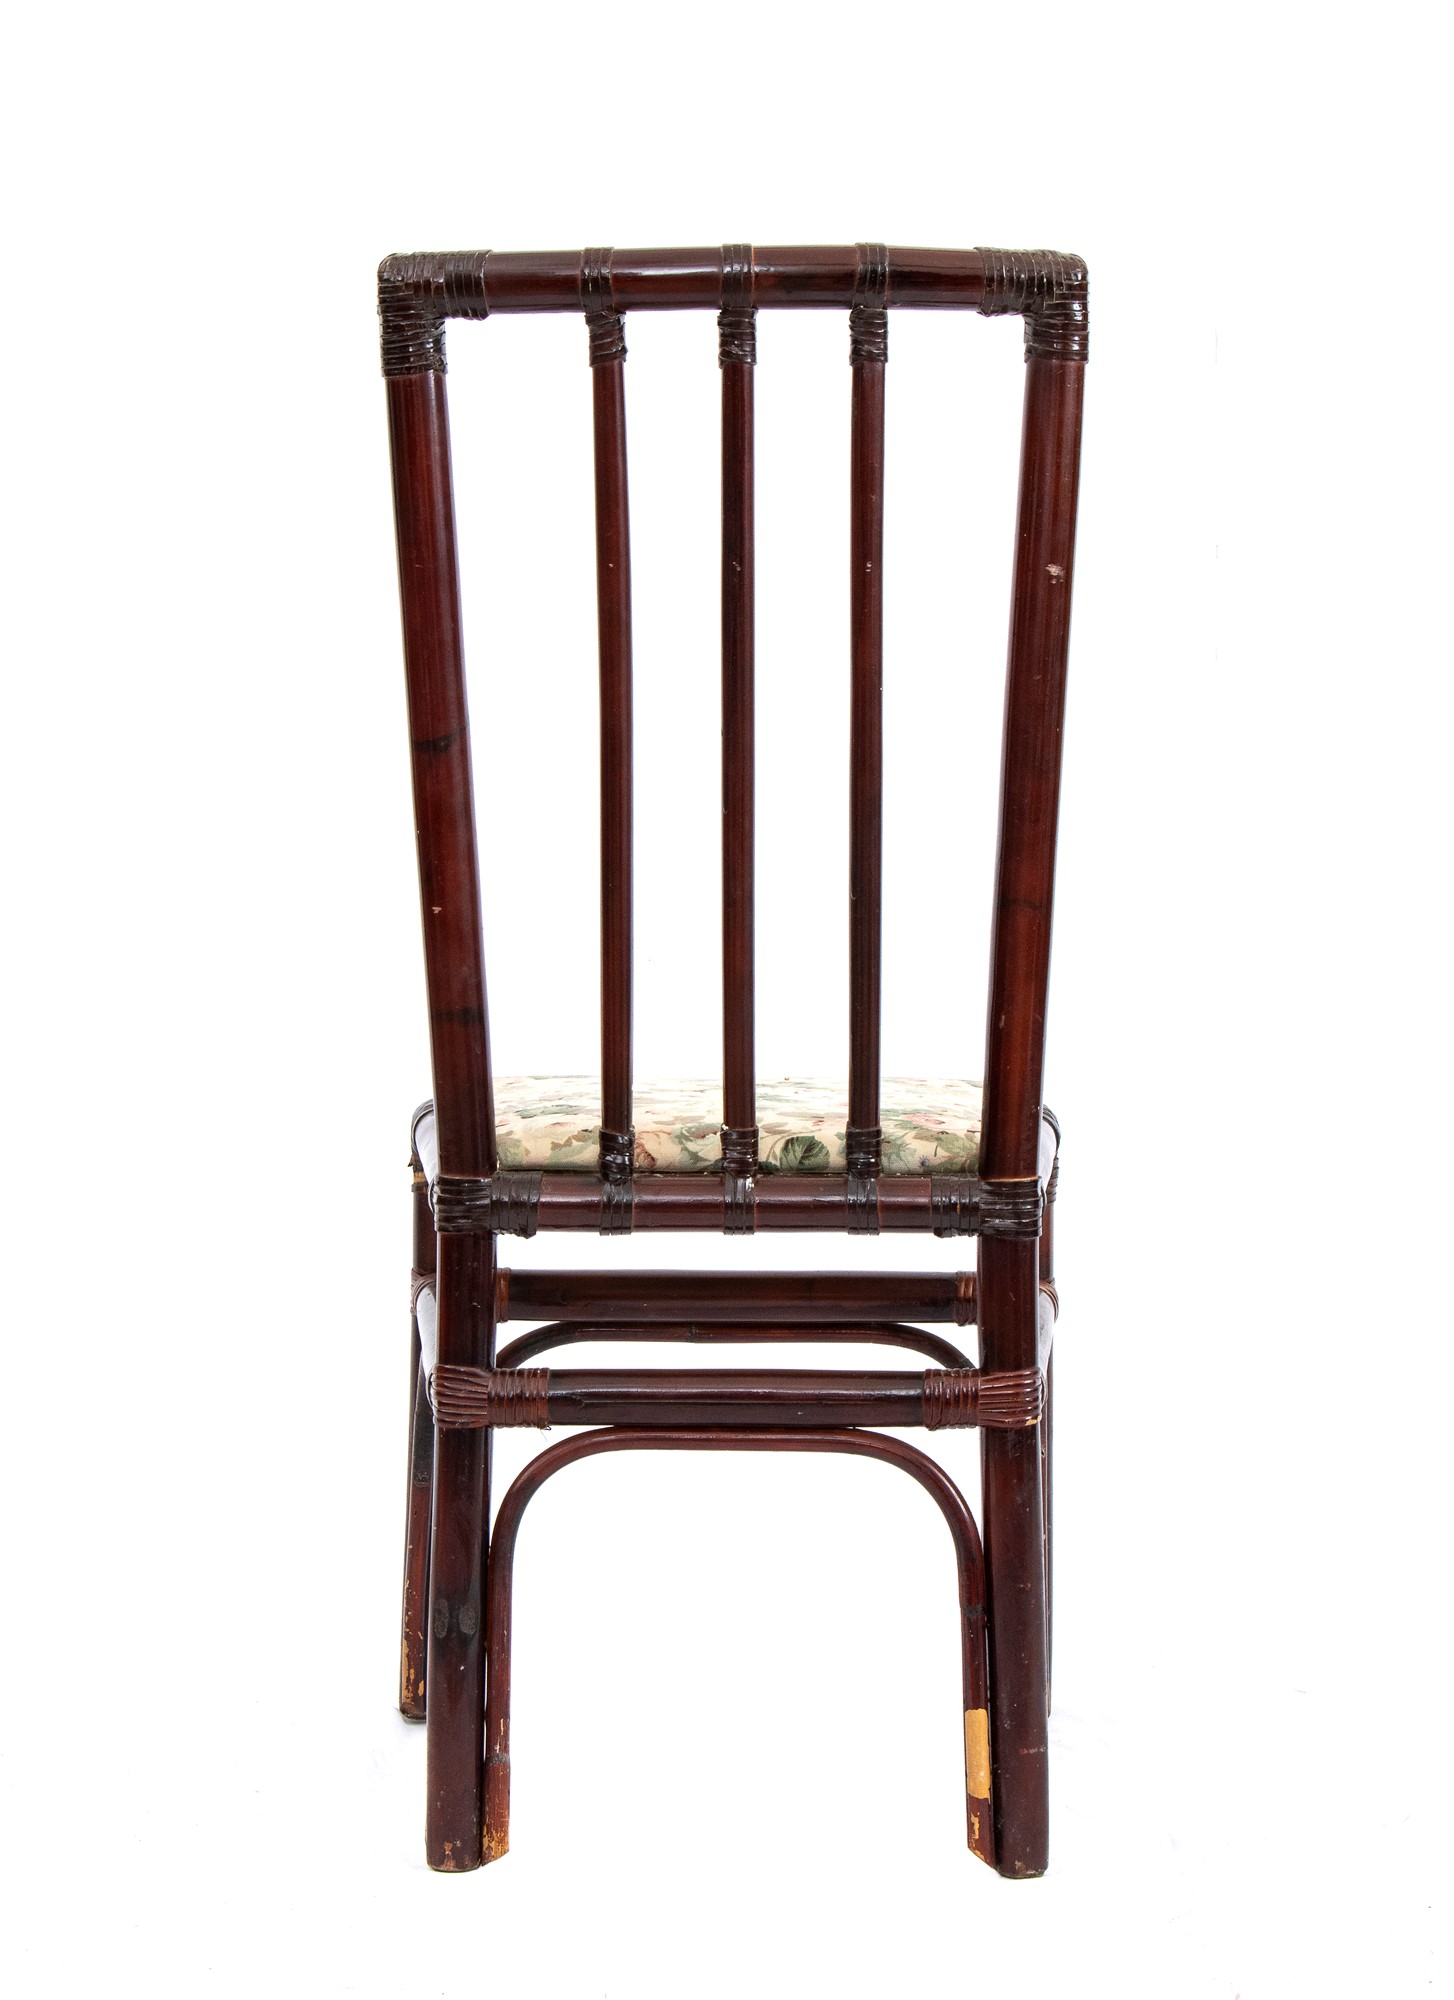 Six chairs with lacquered bamboo structure - Image 13 of 15